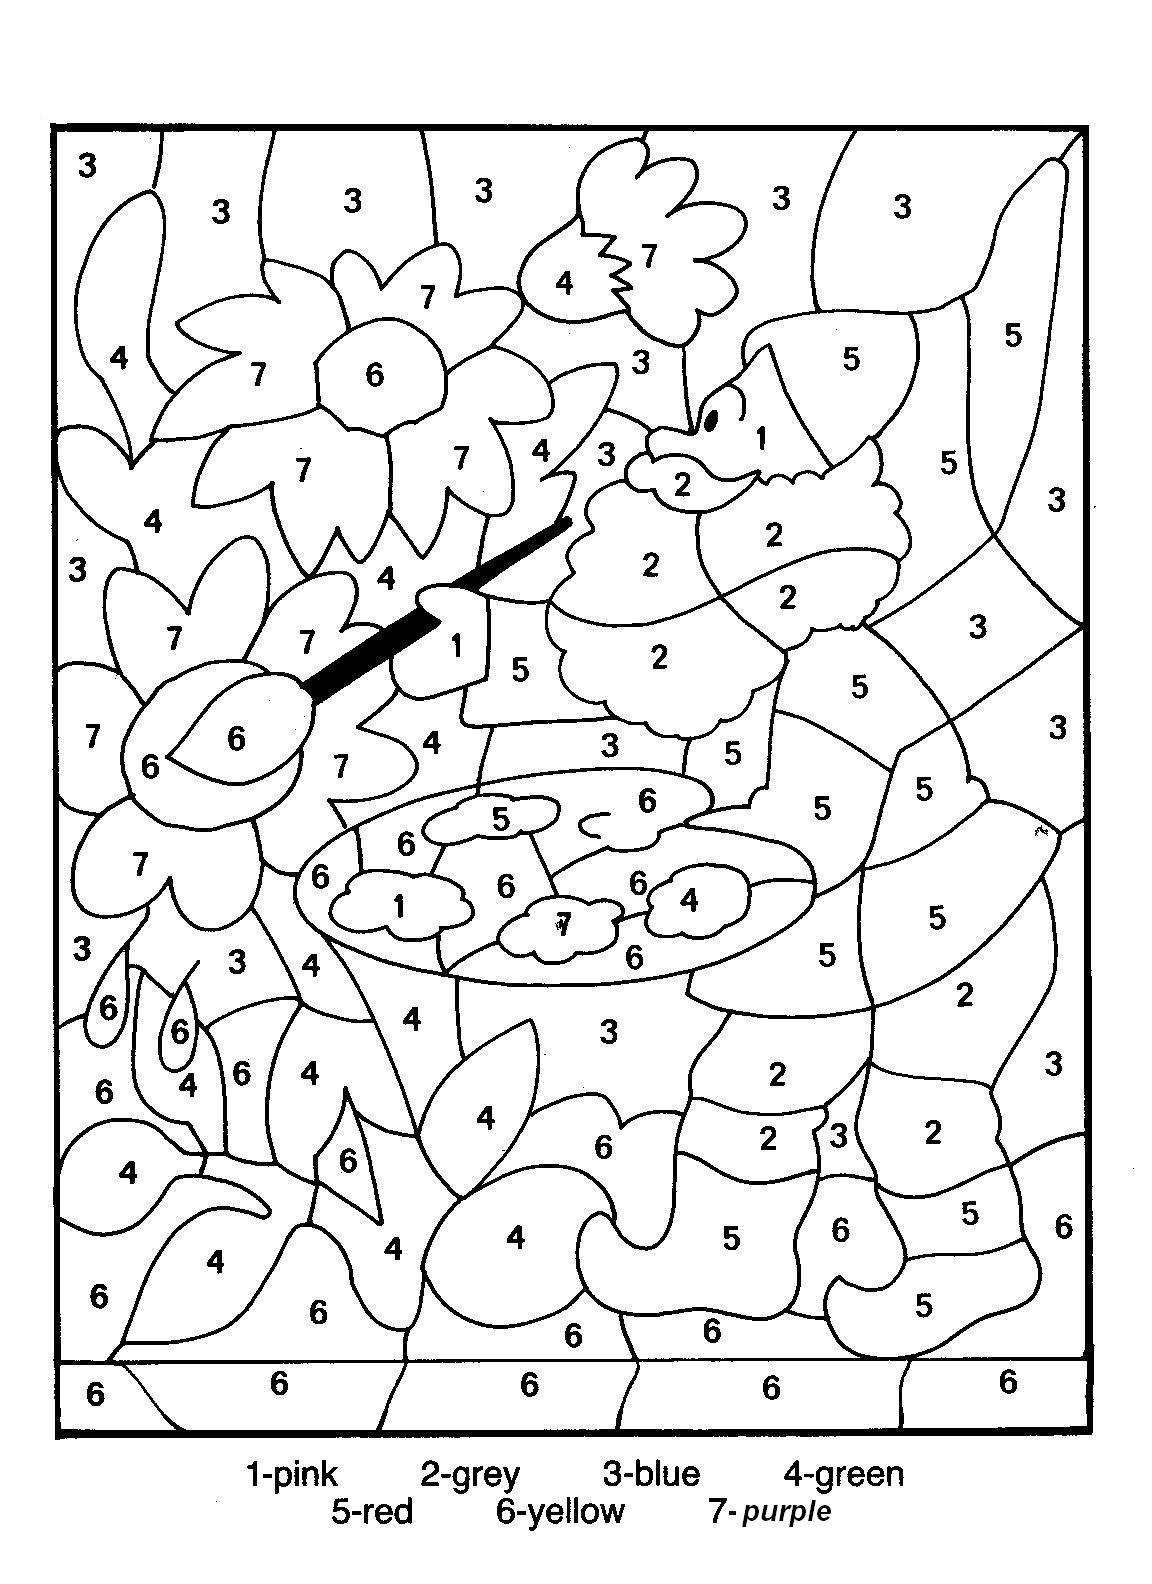 Coloring page: Coloring by numbers (Educational) #125500 - Printable coloring pages